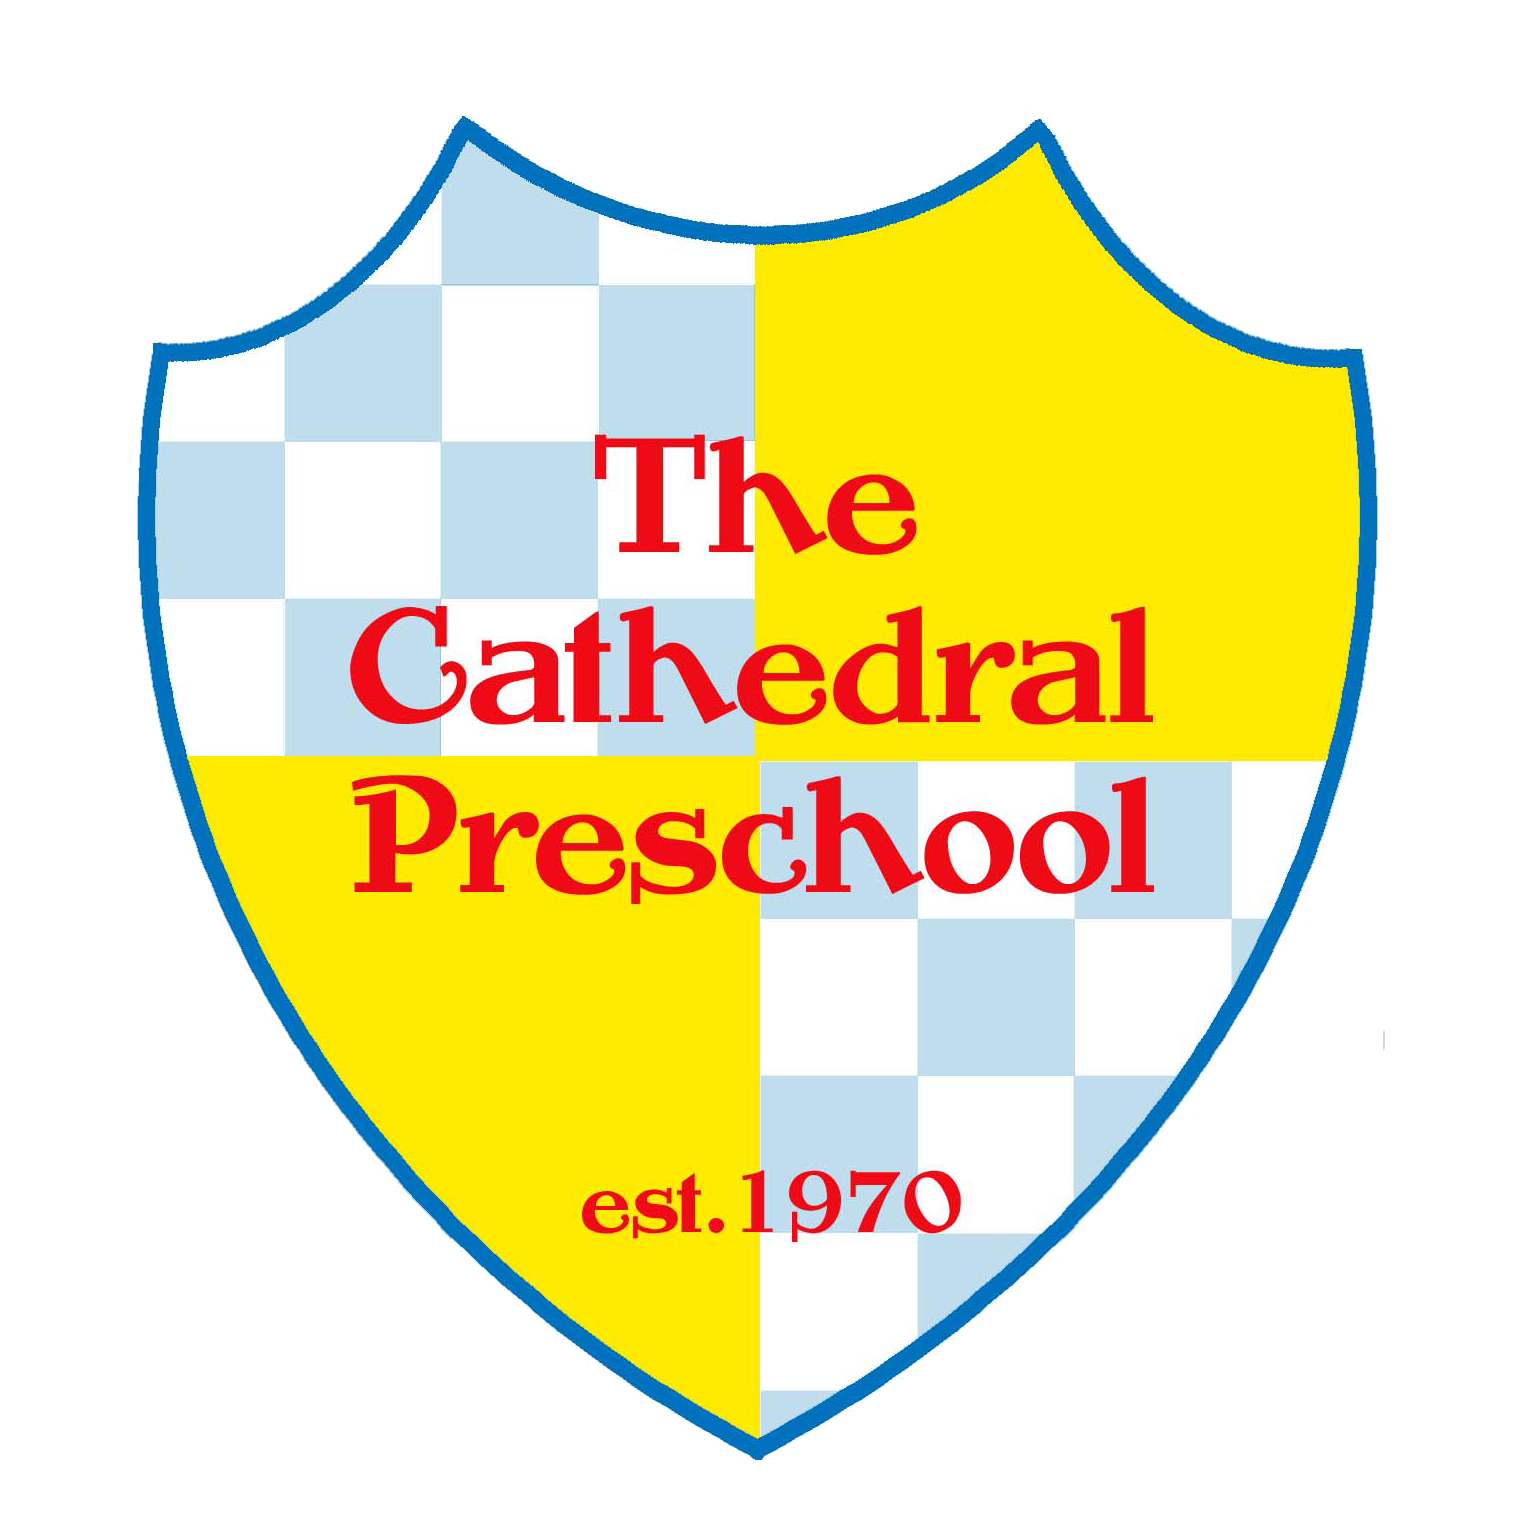 The Cathedral Preschool